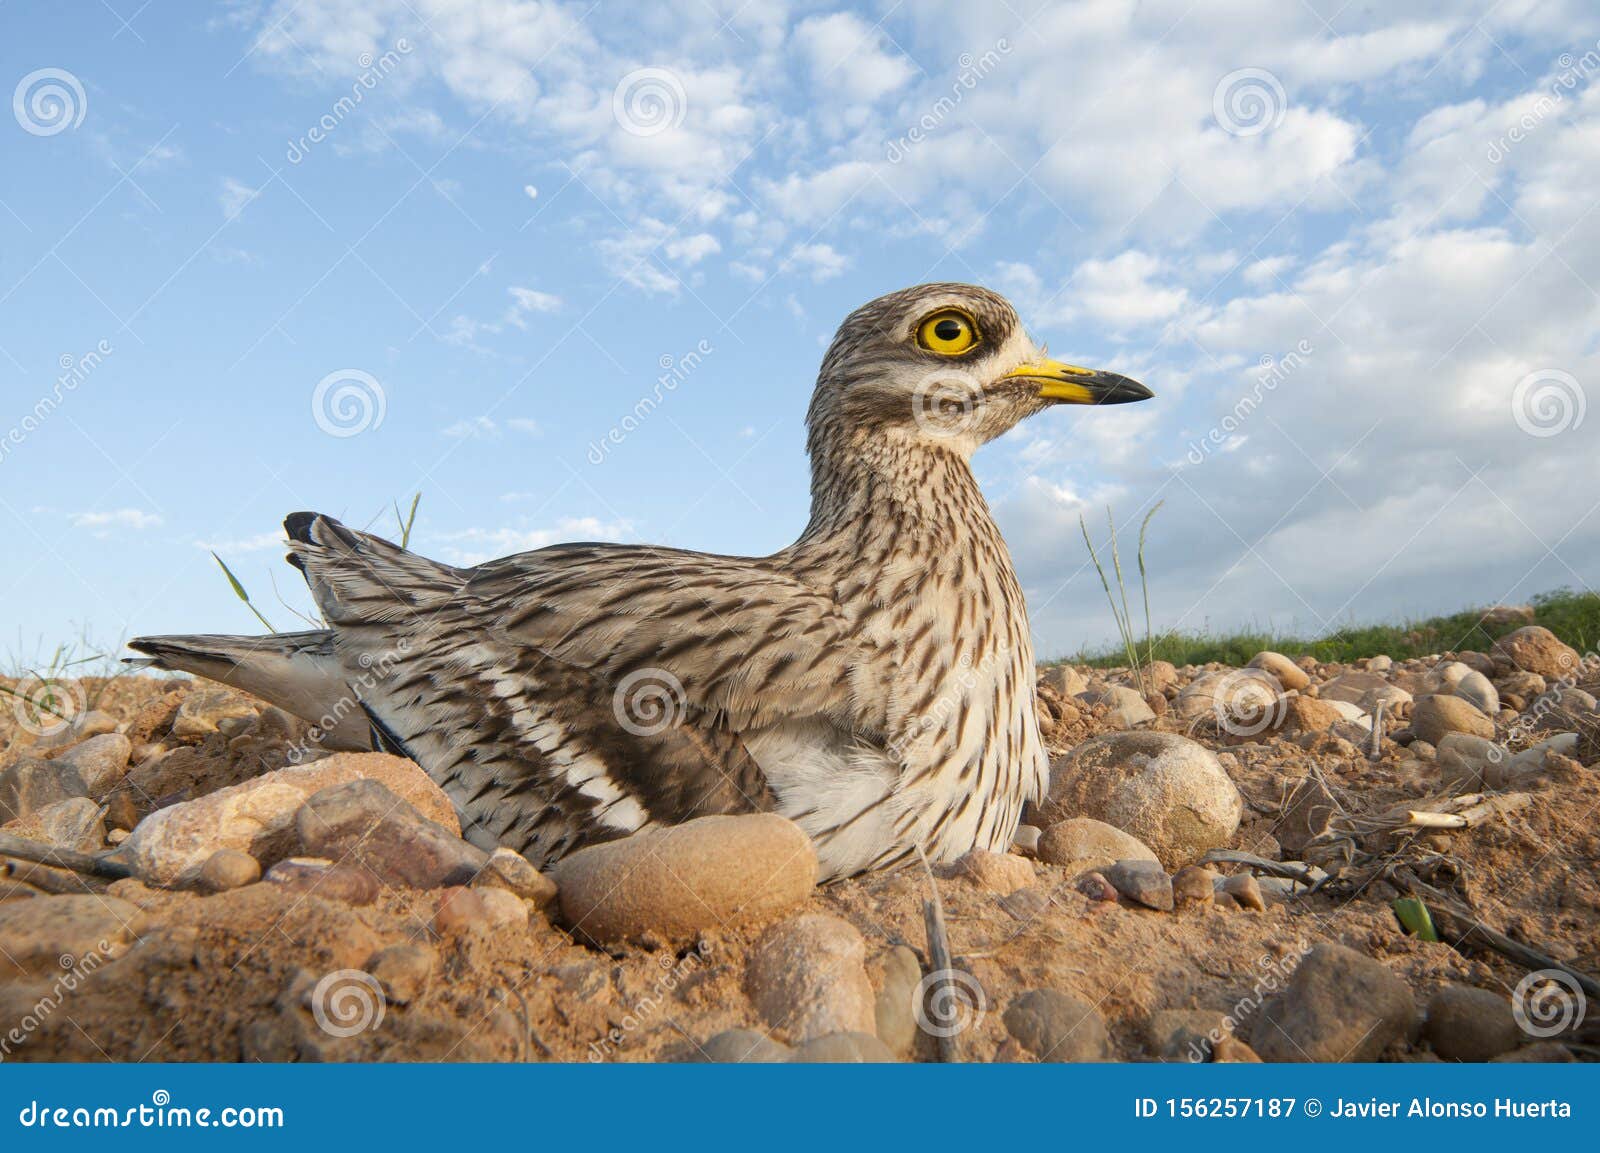 burhinus oedicnemus eurasian thick knee, eurasian stone-curlew, stone curlew in its nest